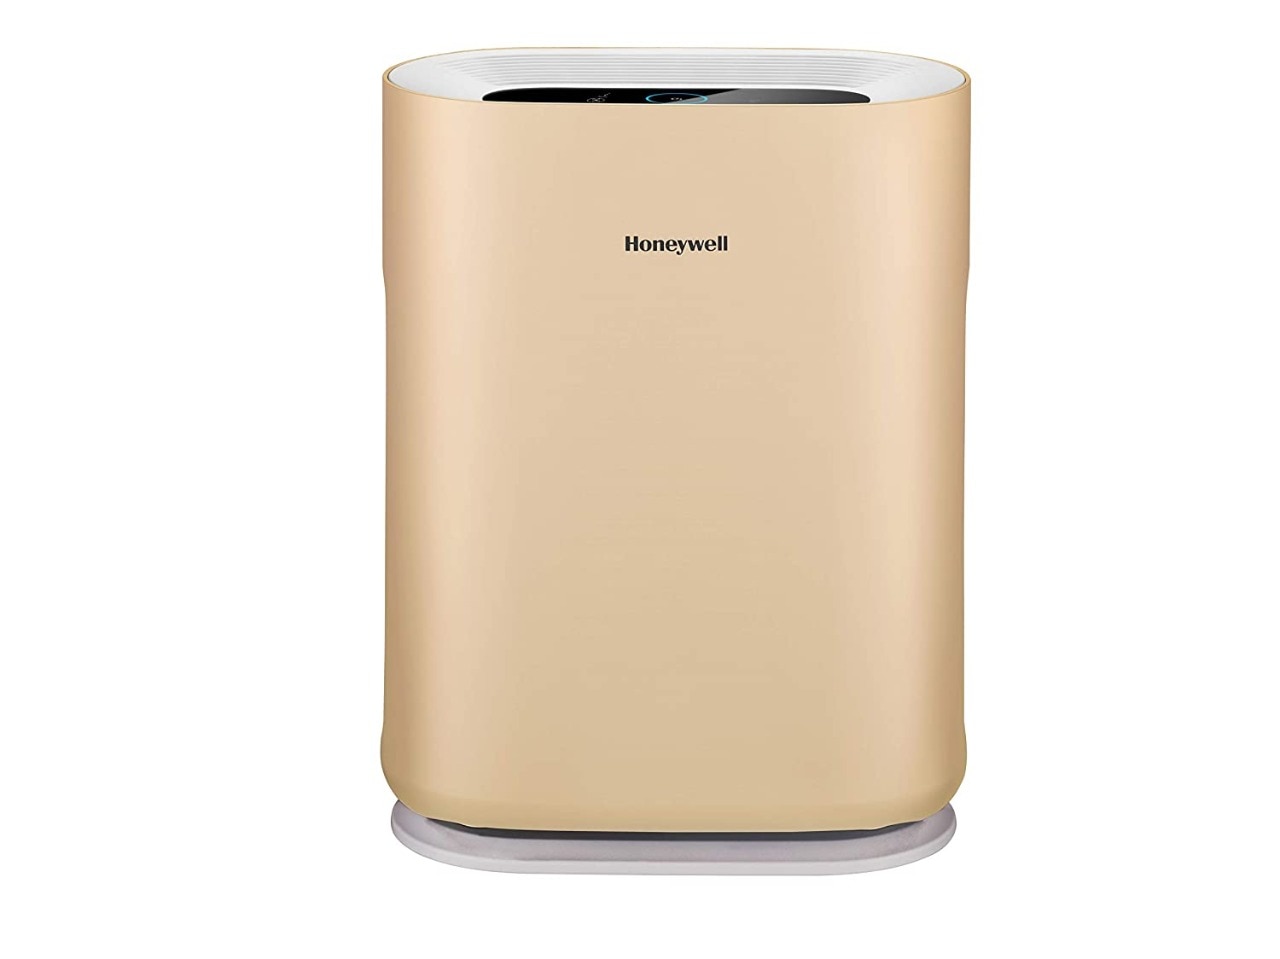 Amazon Navratri Sale: Make the air of your home virus and bacteria free, buy a great air purifier for less than 10 thousand